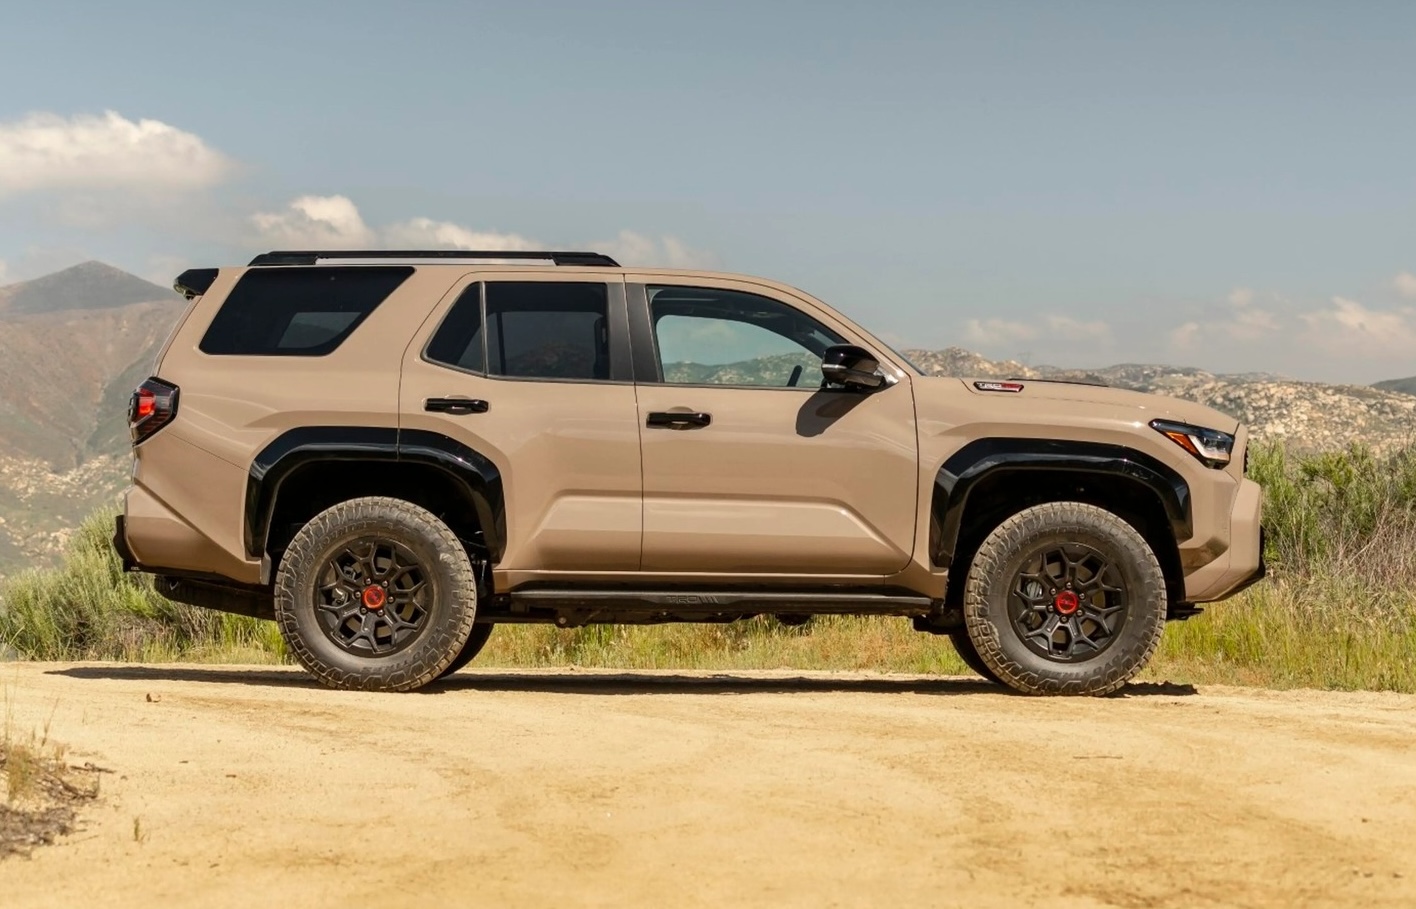 2025 Toyota 4runner 2025 4Runner Photos & Specs! 🔥 Trailhunter, TRD Pro, Off-Road, Limited Trims 2025 Toyota 4Runner Wallpapers 1 copy